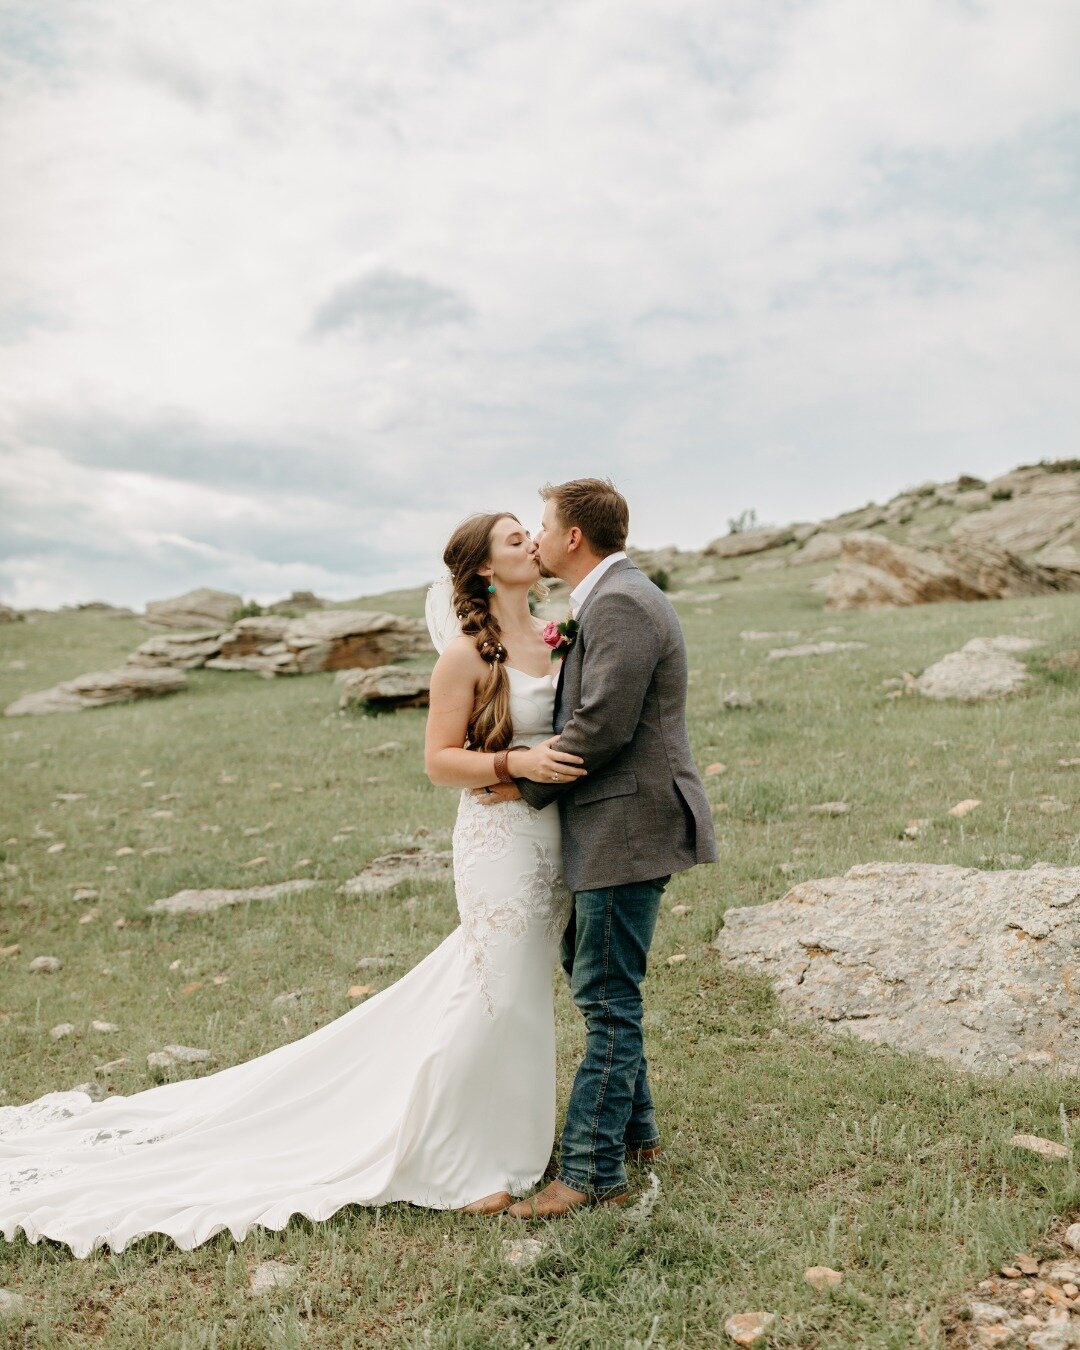 Tyler + Jondie

this rustic &amp; rainy affair in Central Montana was one to remember! amidst the rain, Tyler &amp; Jodie exchanged their vows at Utica City Hall. festivities continued at Tall Boys Tavern where Jondie's family was grilling up food in